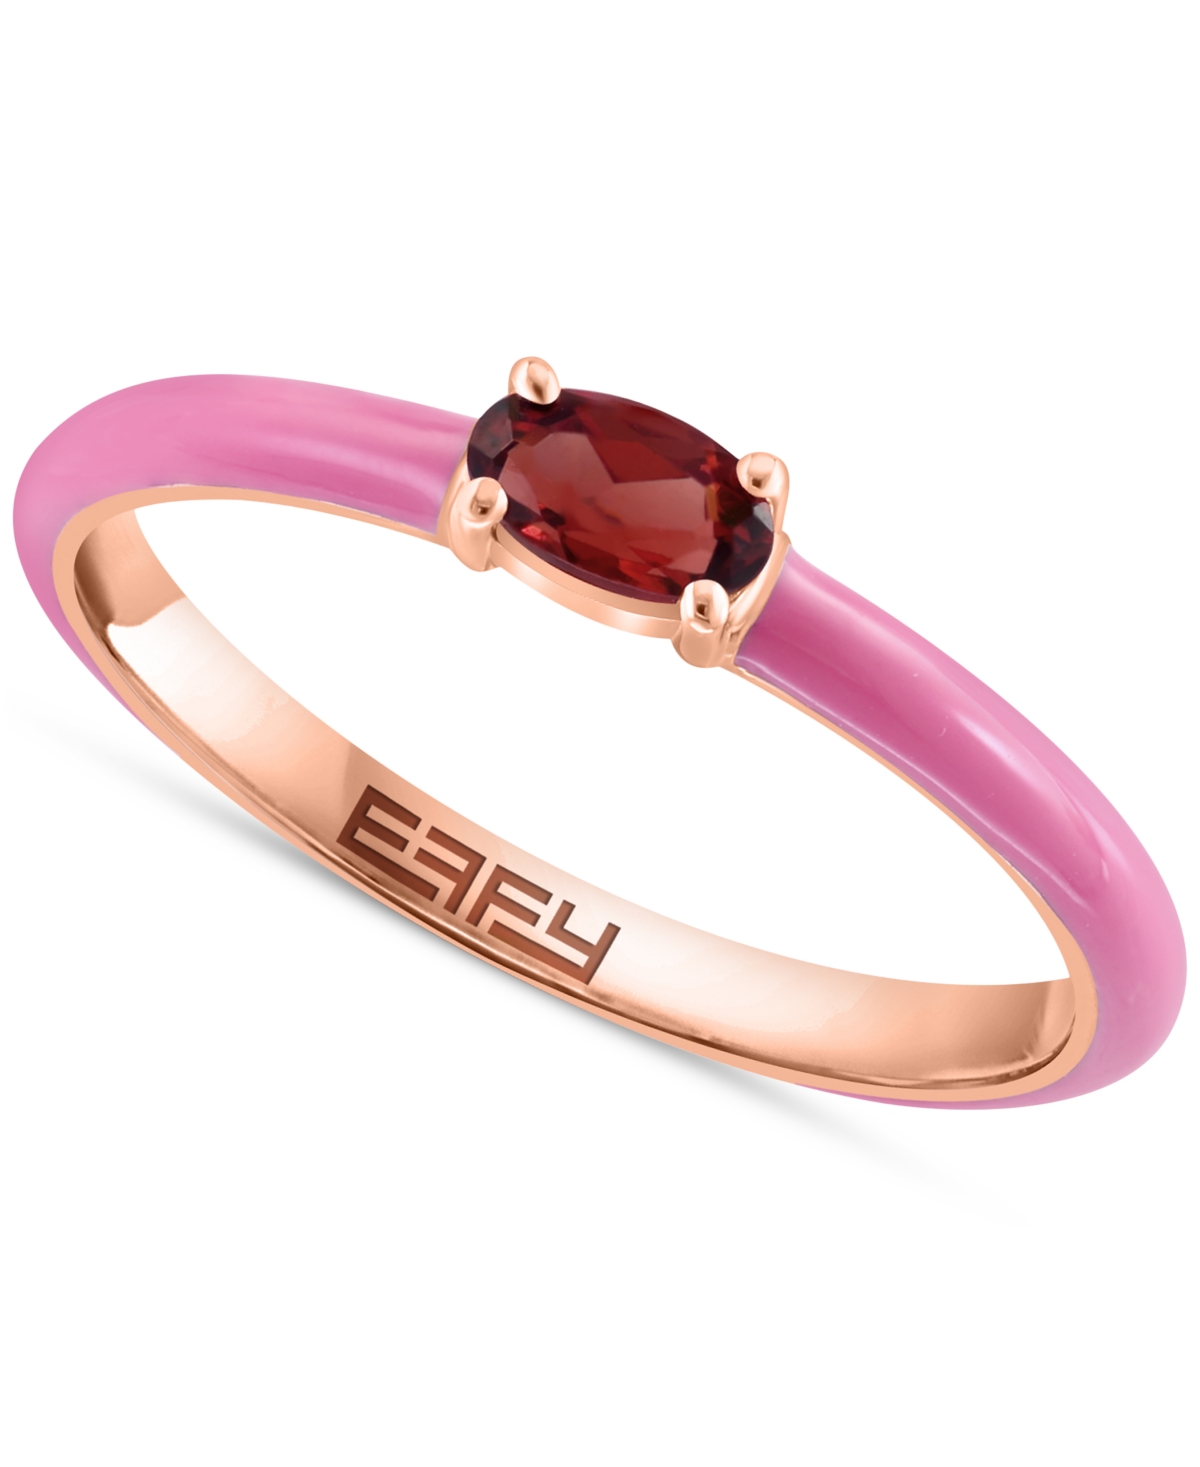 EFFY COLLECTION EFFY GARNET (1/6 CT. T.W.) & ENAMEL RING IN 14K ROSE GOLD-PLATED STERLING SILVER